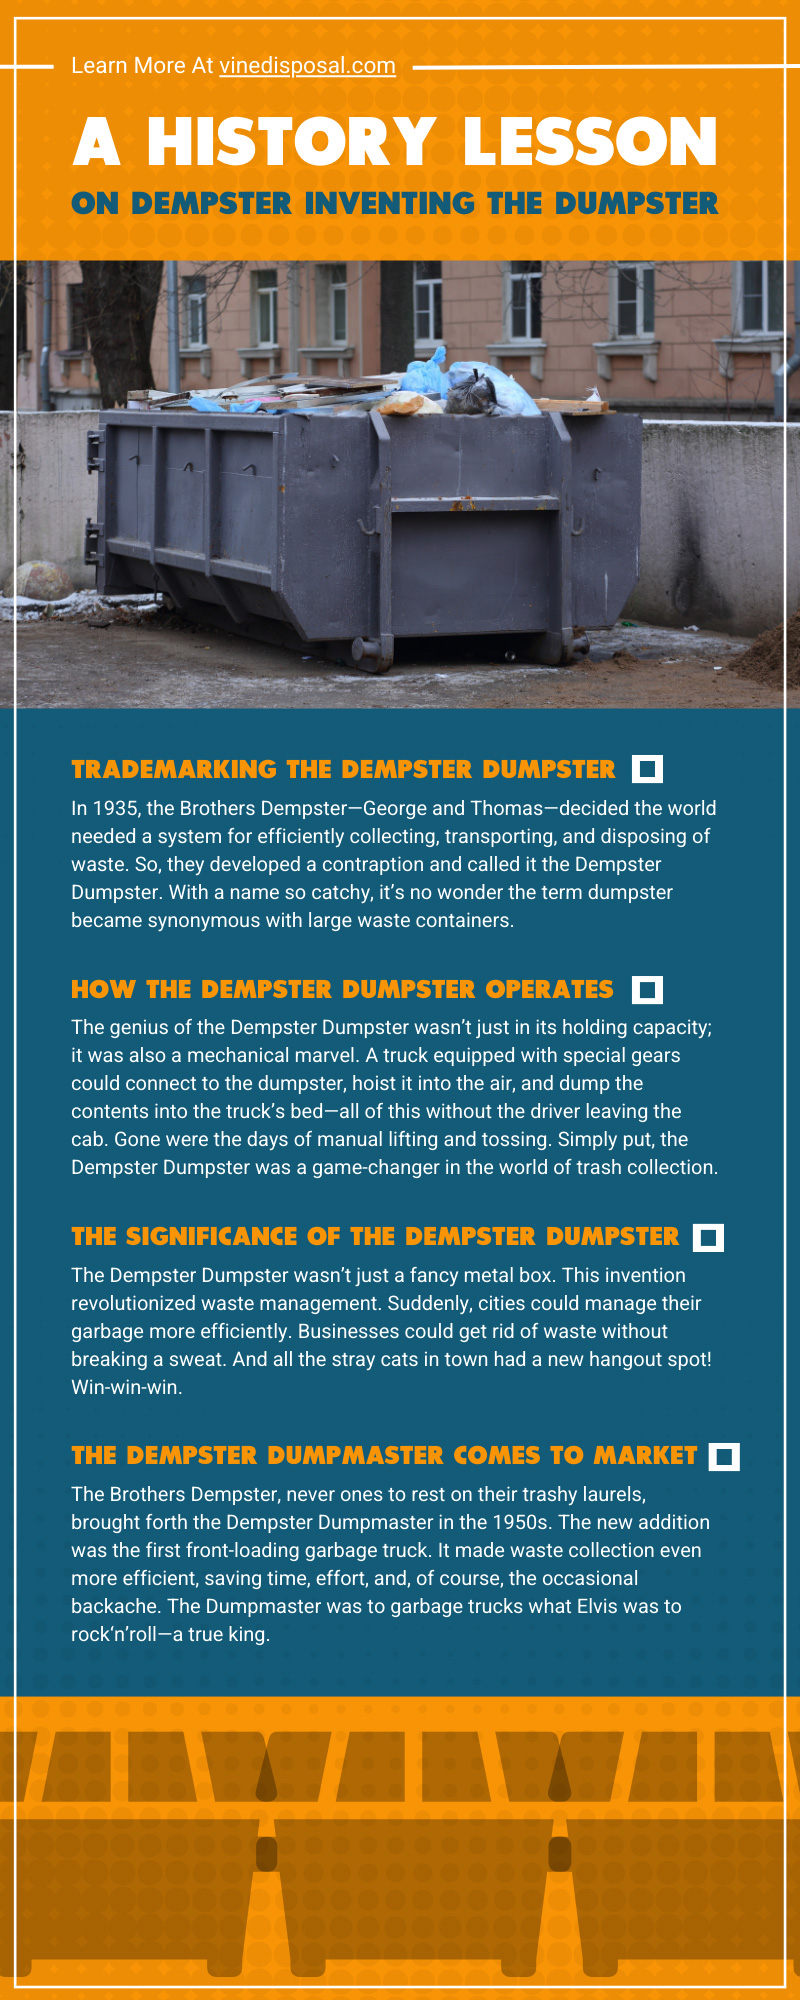 A History Lesson on Dempster Inventing the Dumpster